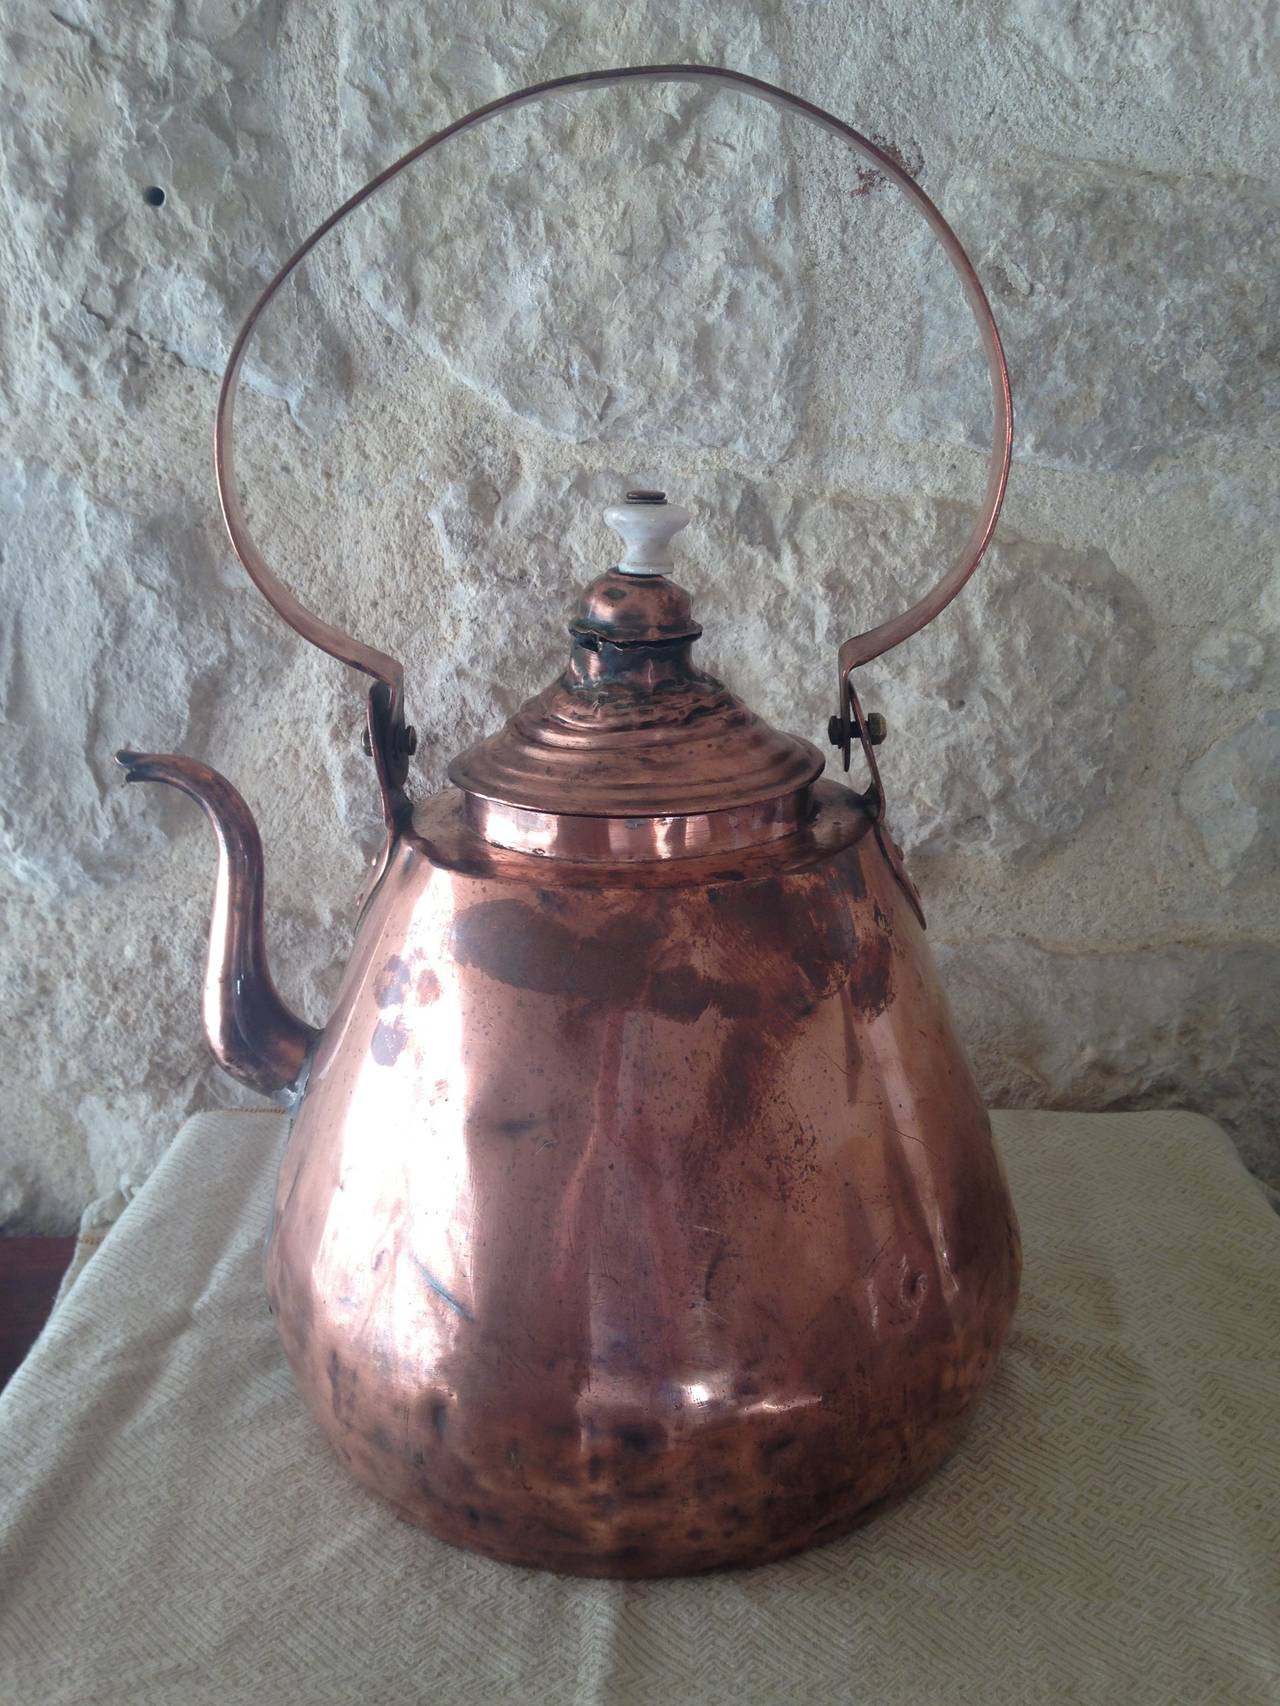 We love this kettle for its large size and beautiful patina. All hand-riveted, the lid has some dents and bruises that are typical for a piece of this age, but it is totally serviceable or perfect as a decorative piece atop a shelf. Please note that